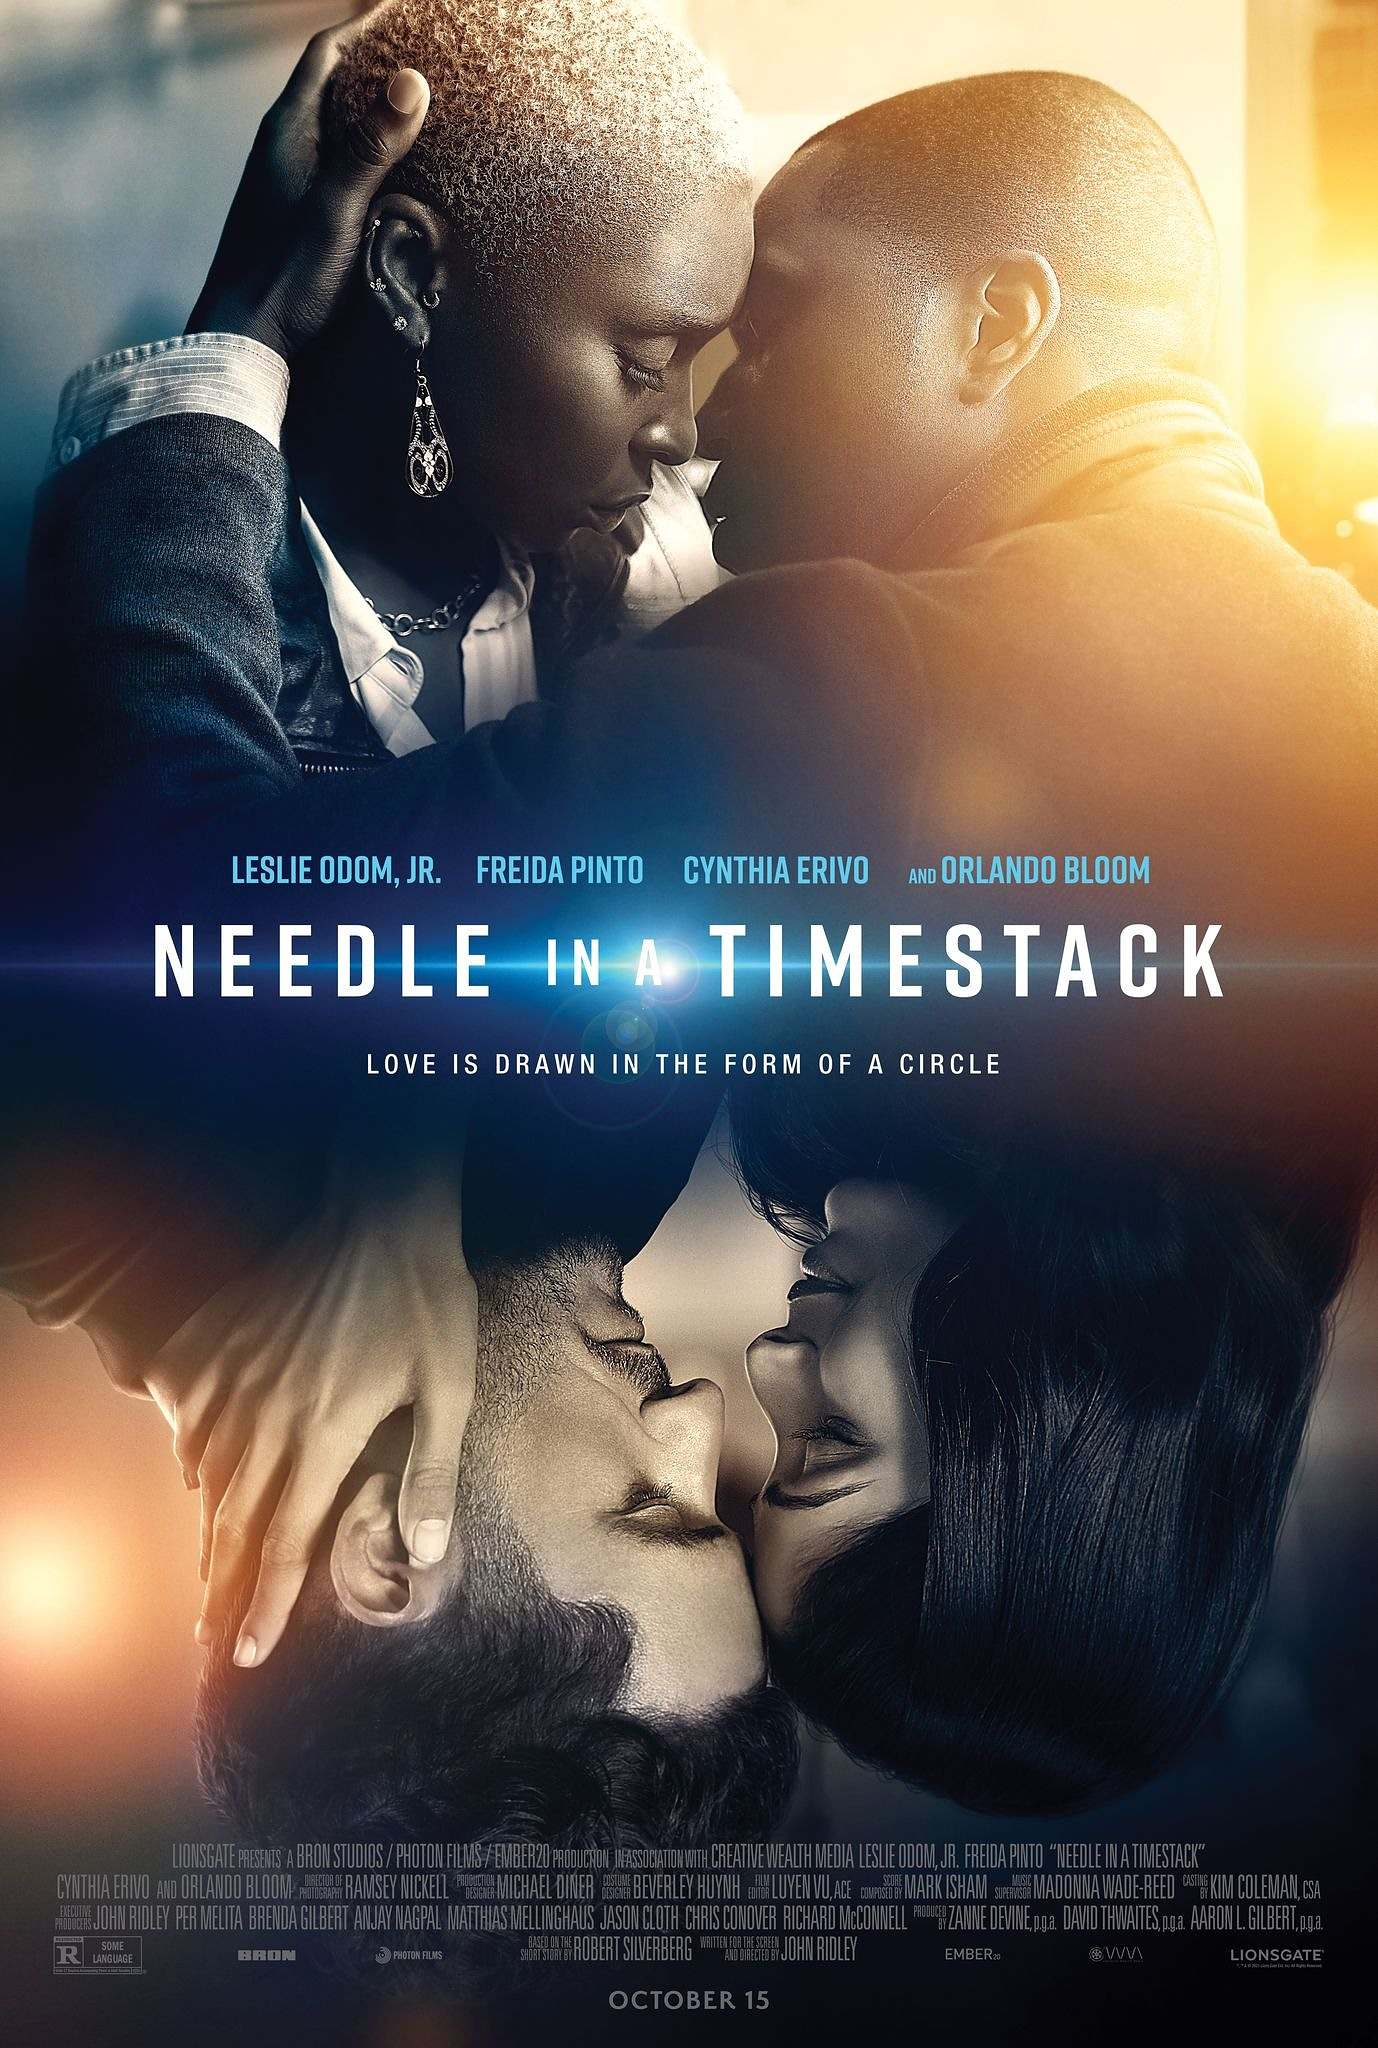 2nd Trailer For 'Needle In A Timestack' Movie